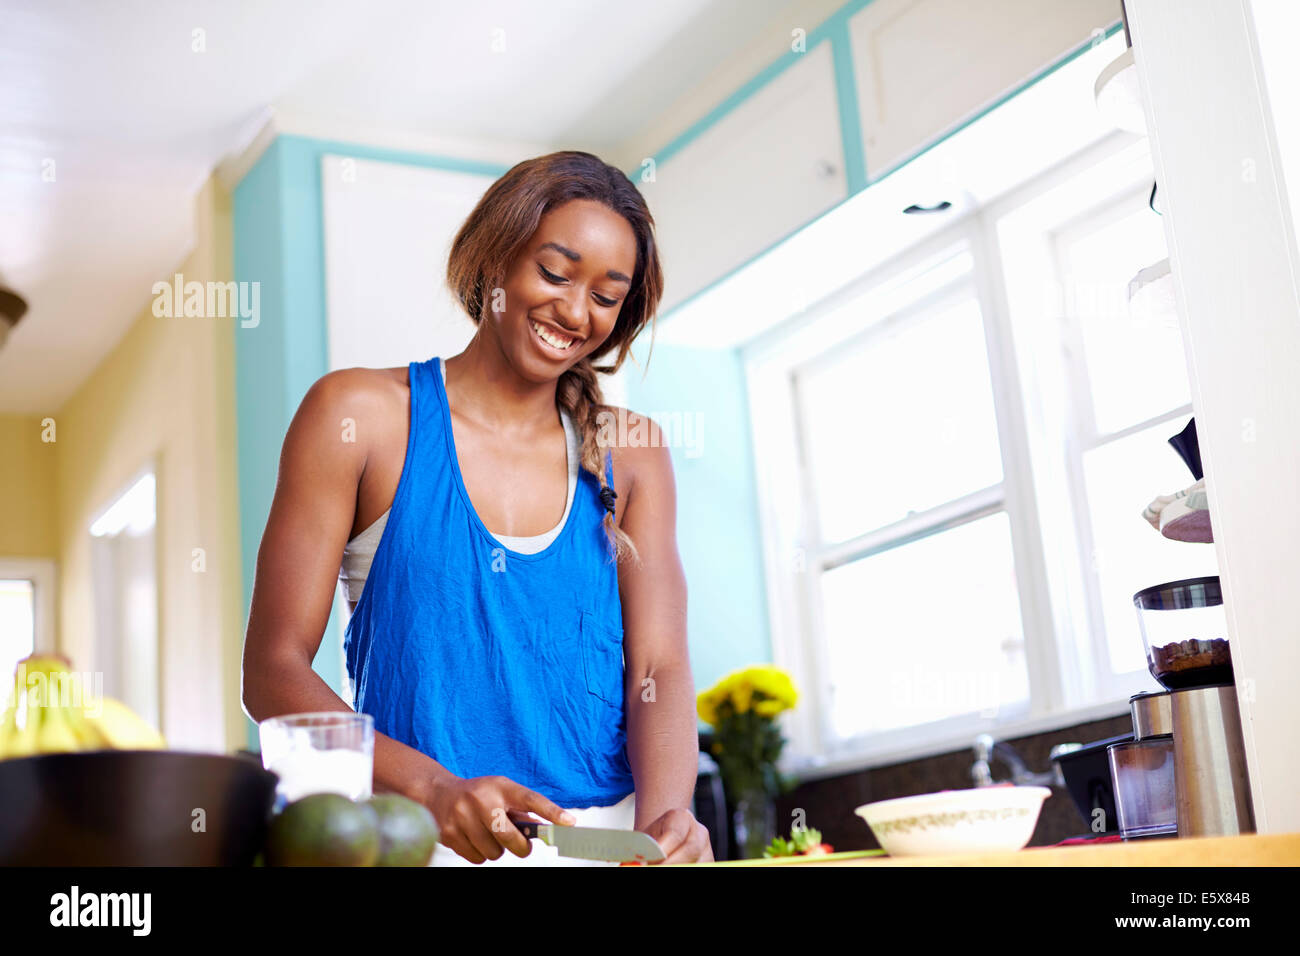 Young woman taking a training break, preparing food in kitchen Stock Photo